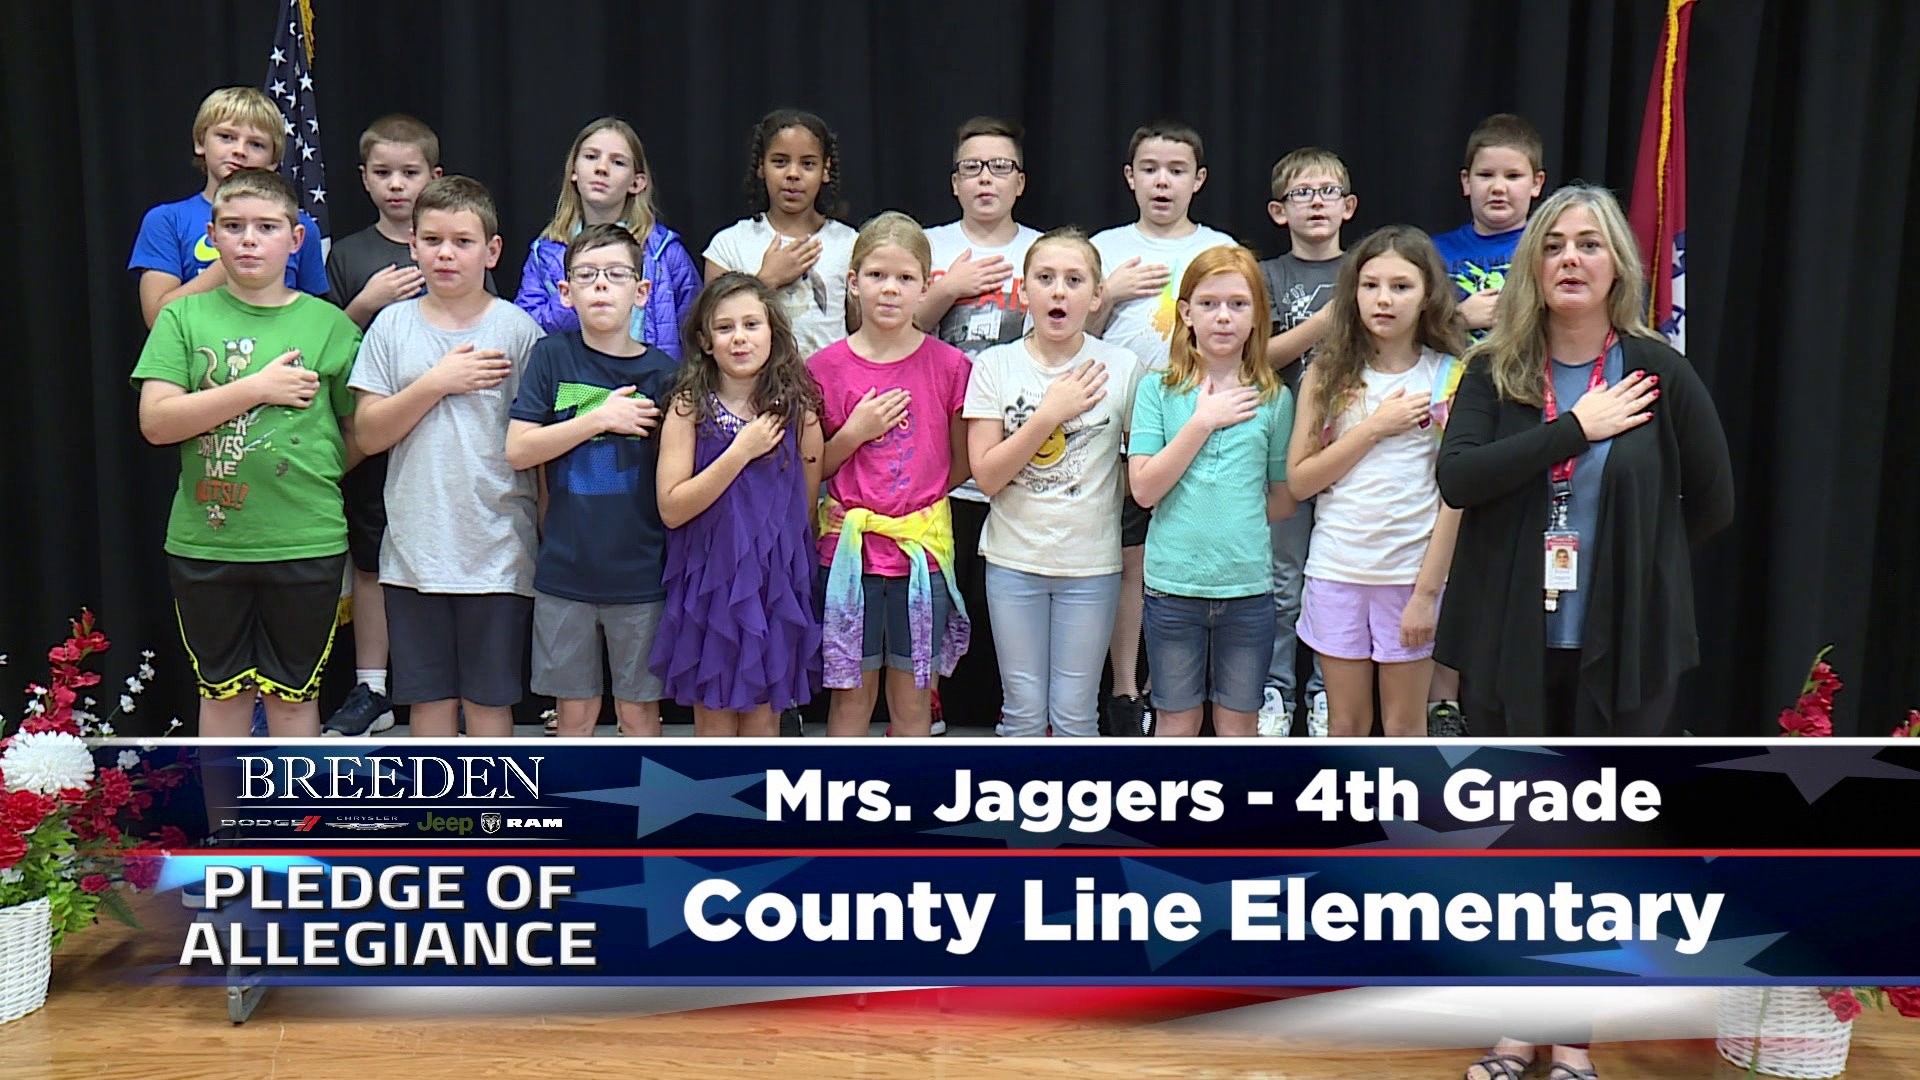 Mrs. Jaggers  4th Grade County Line Elementary